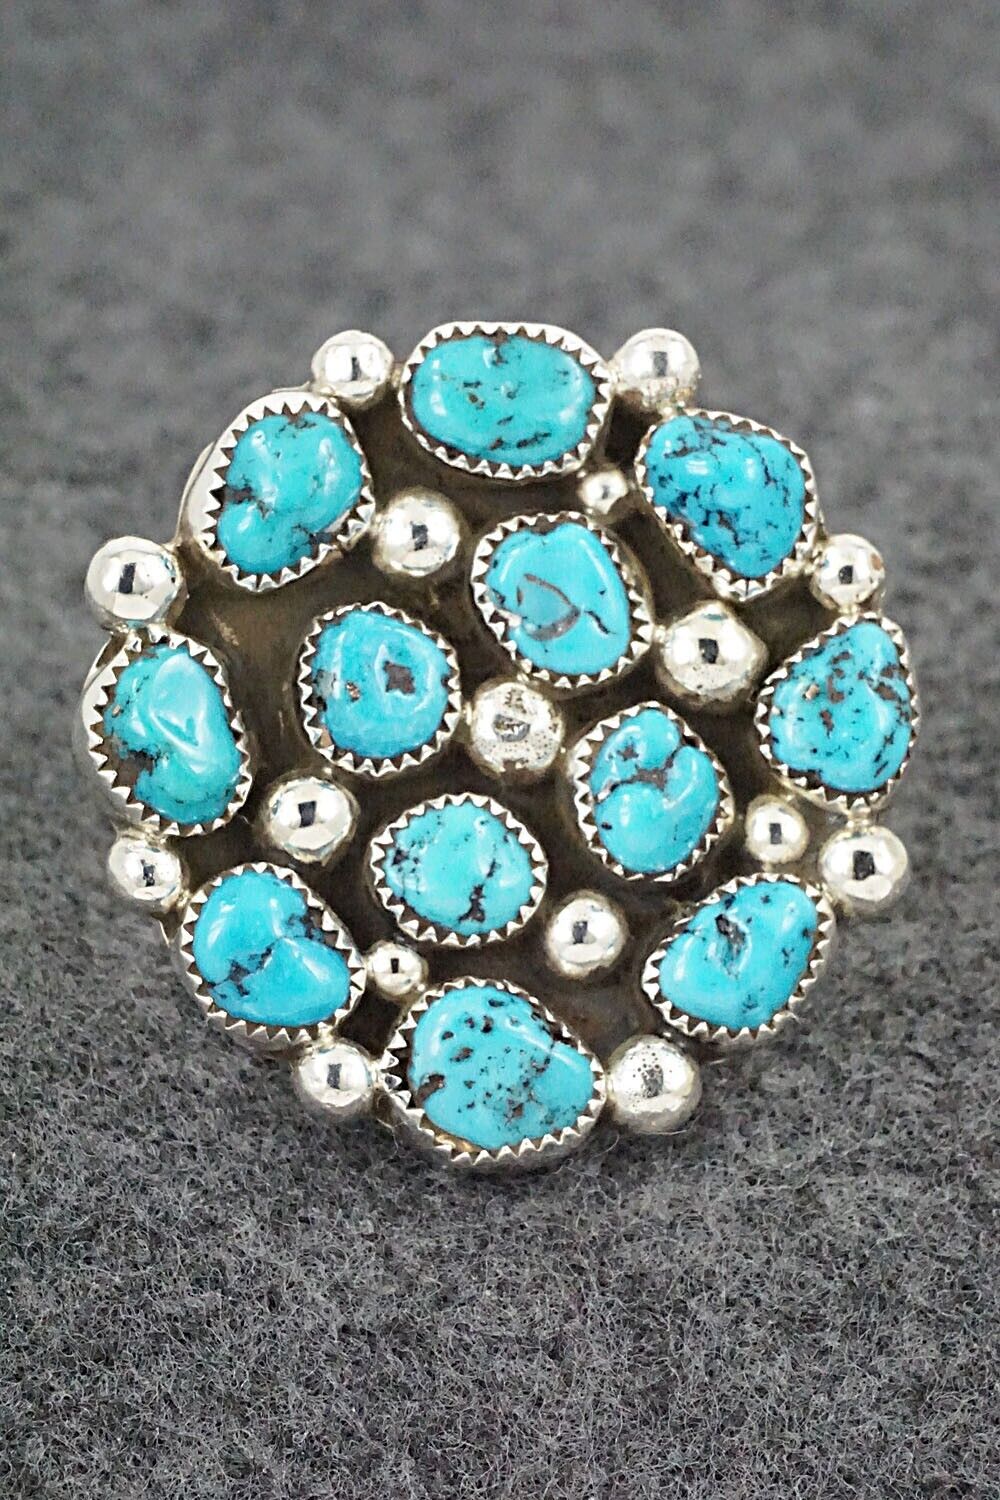 Turquoise and Sterling Silver Ring - Darlene Begay - Size 9.5